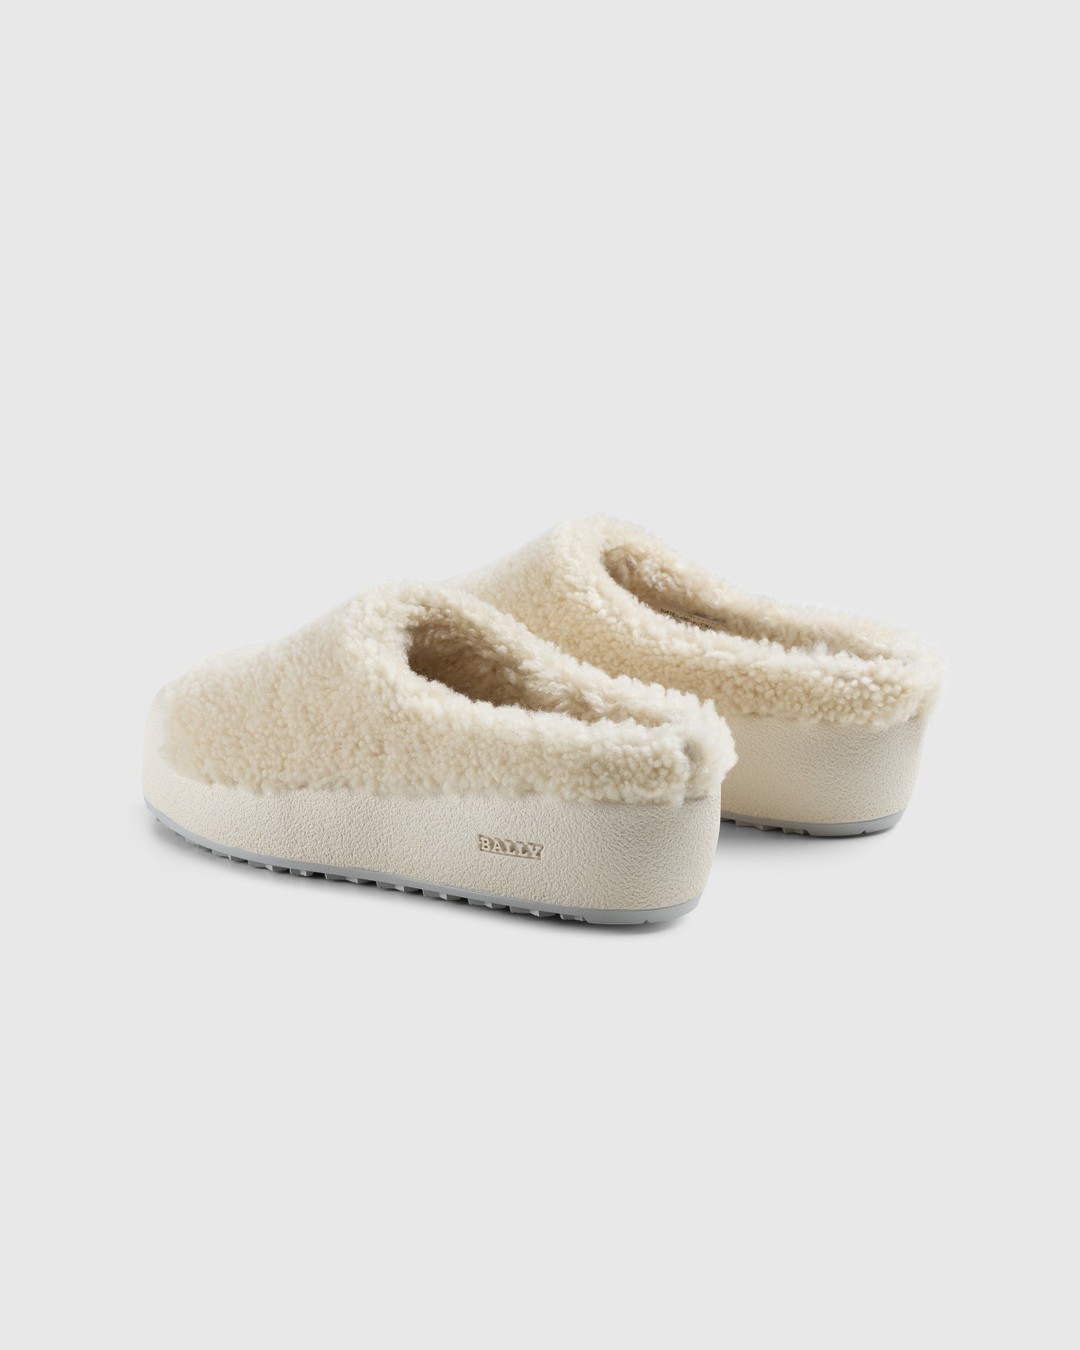 Bally – Crans Leather Slippers Beige - Mules - Beige - Image 4